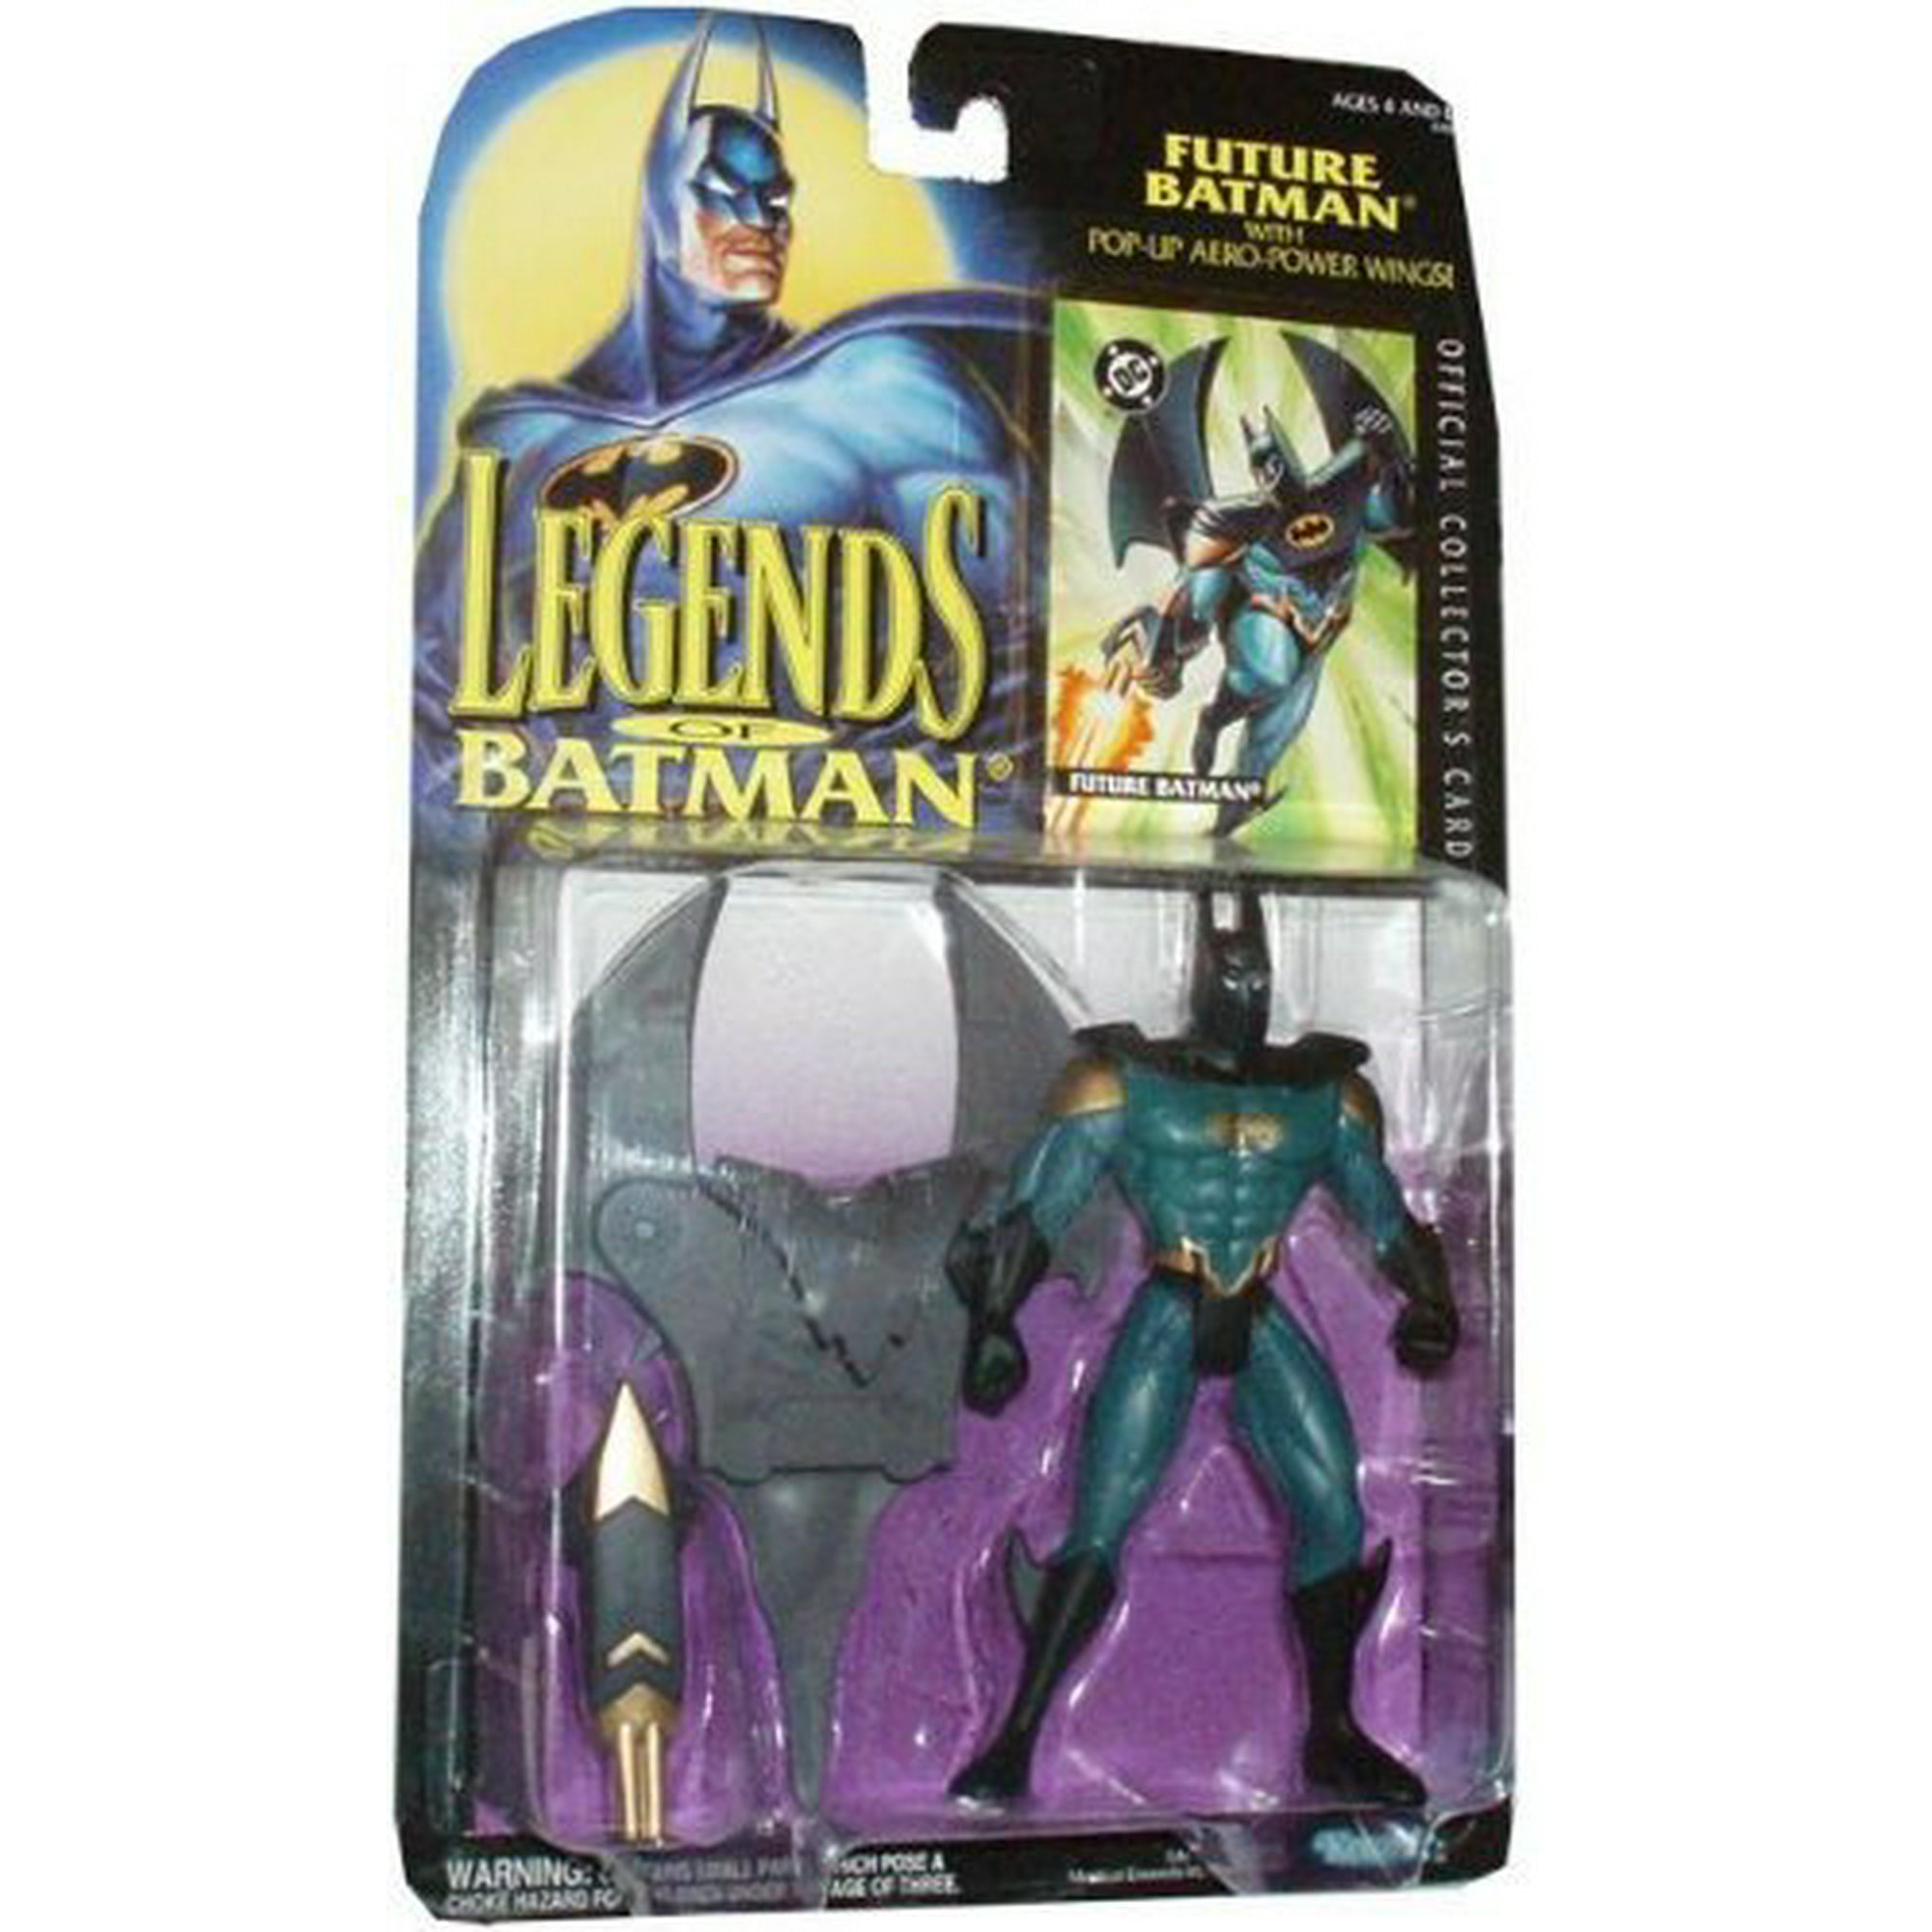 Kenner Year 1994 Legends of Batman 5-1/2 Inch Tall Action Figure - Future  Batman with Pop-Up Aero-Power Wings Plus Bonus Official collectors card |  Walmart Canada